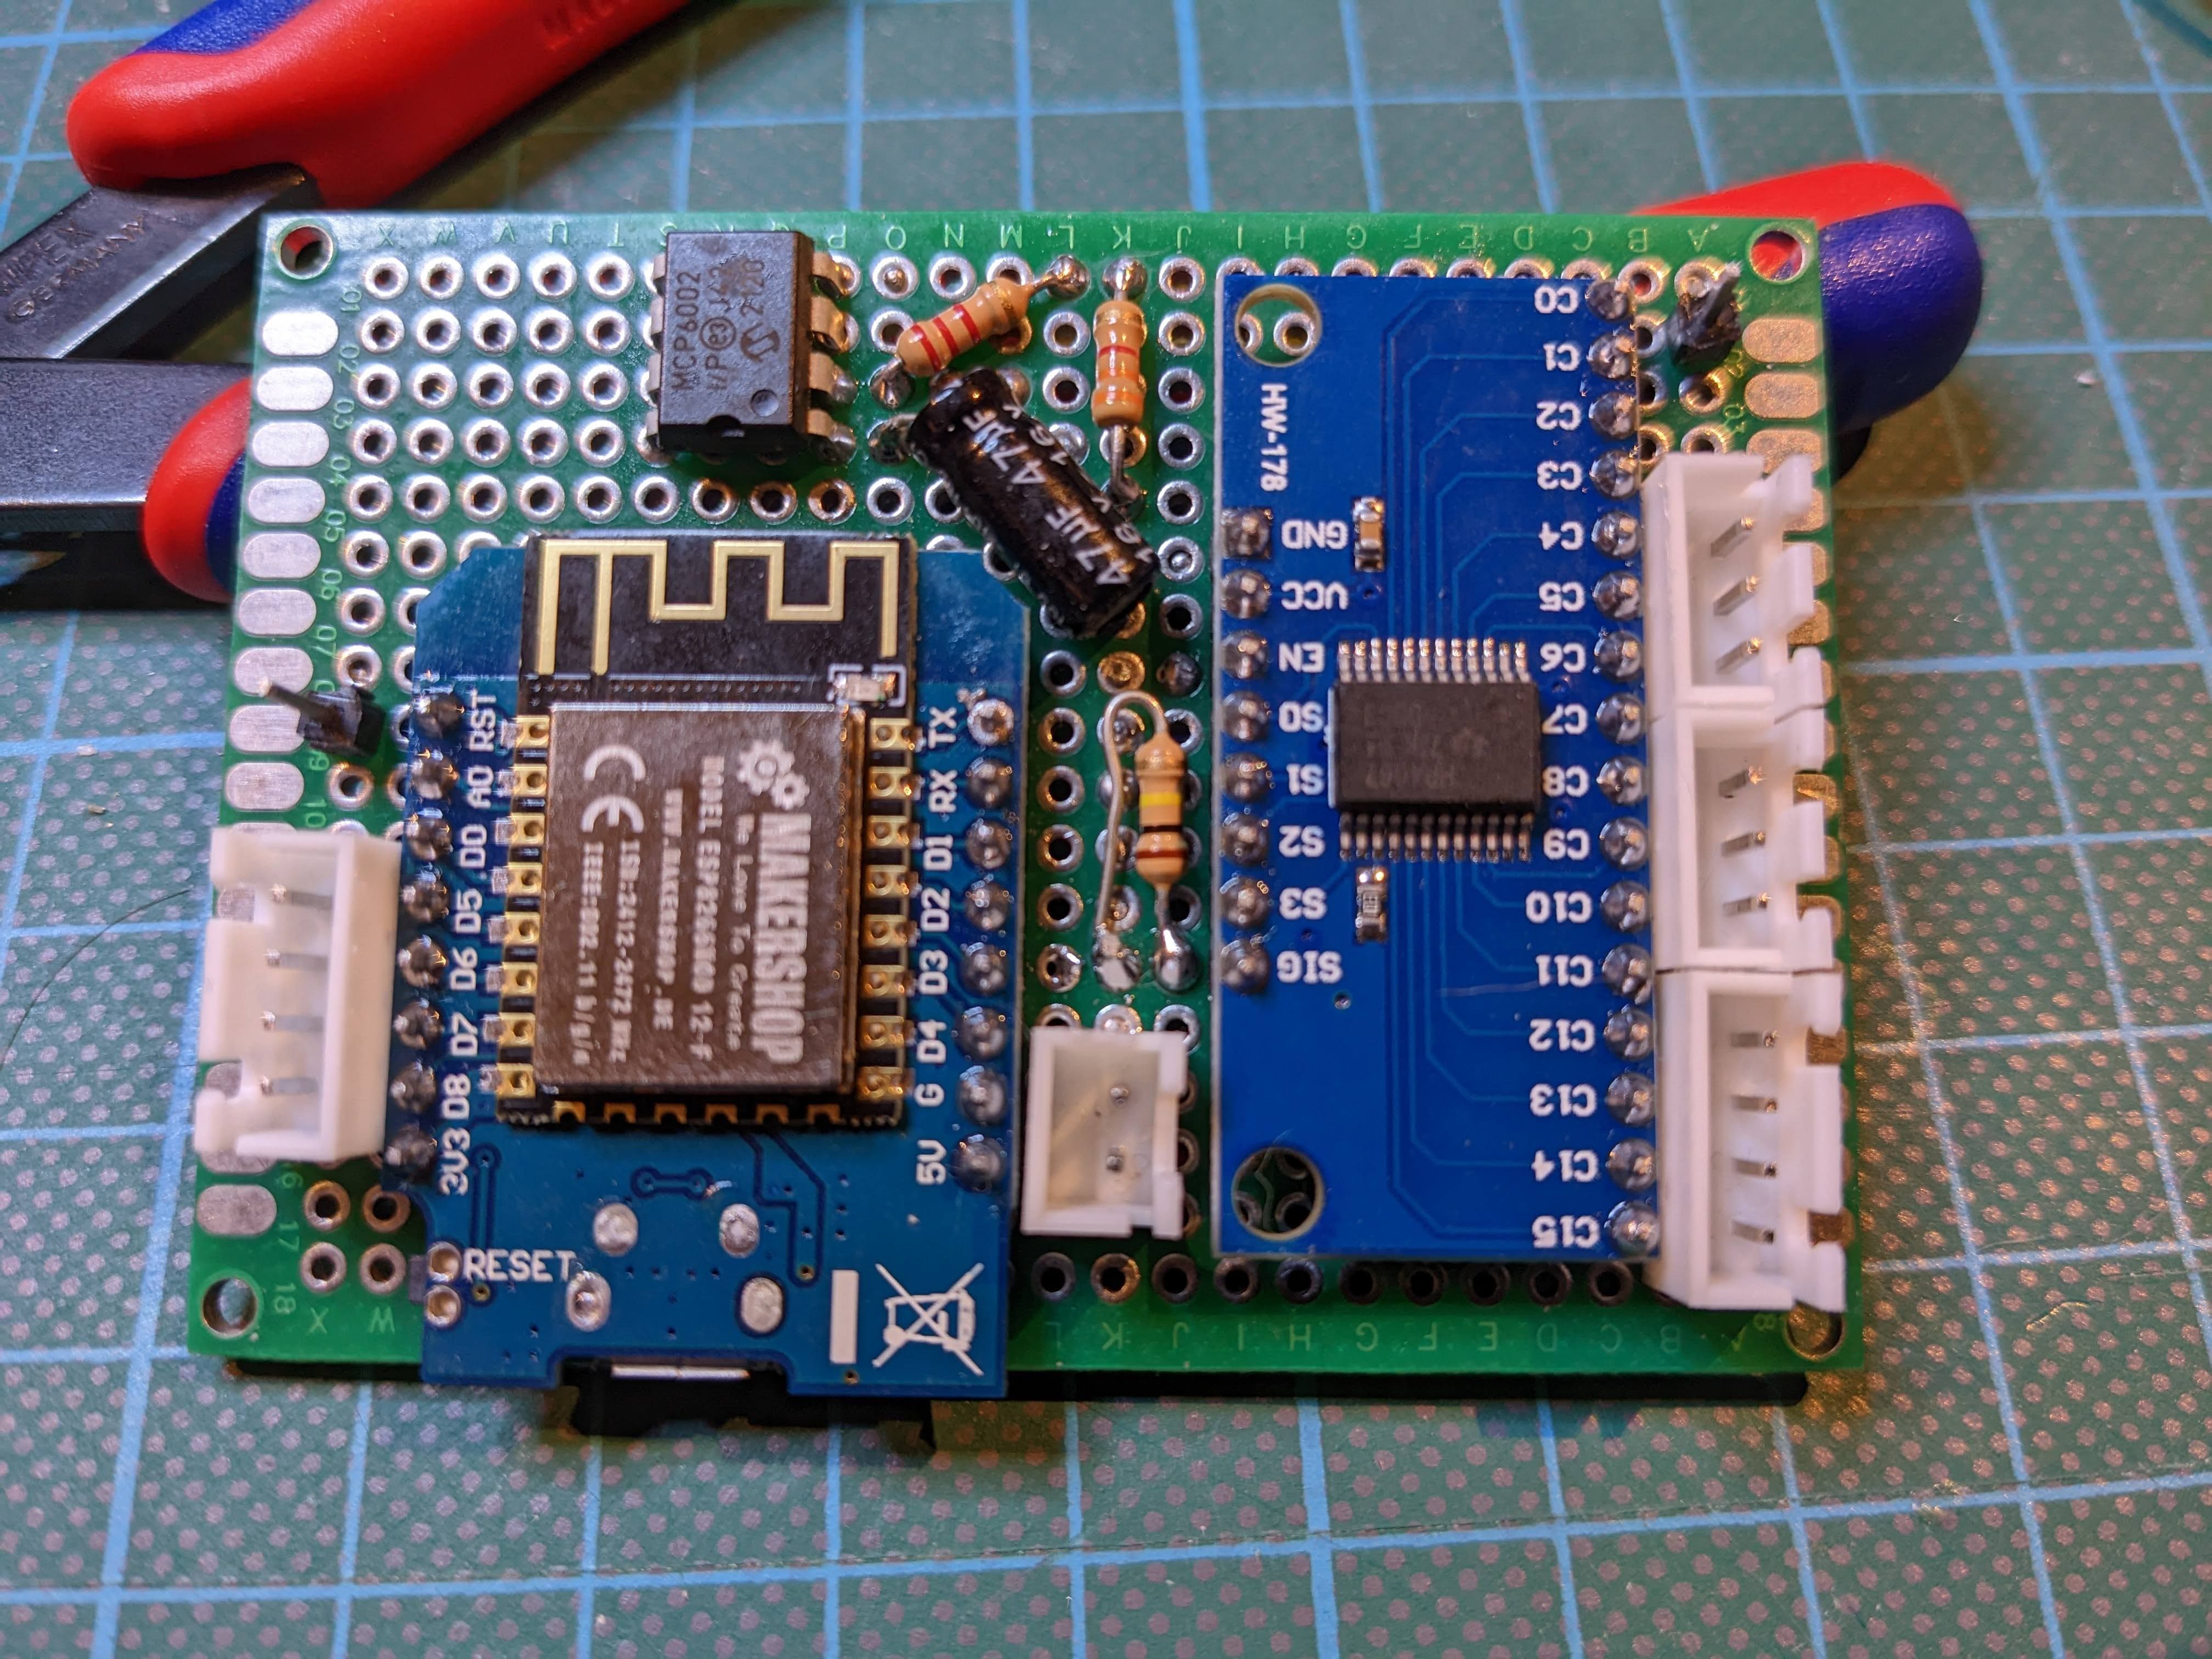 Front of the Soldered Bridge Board